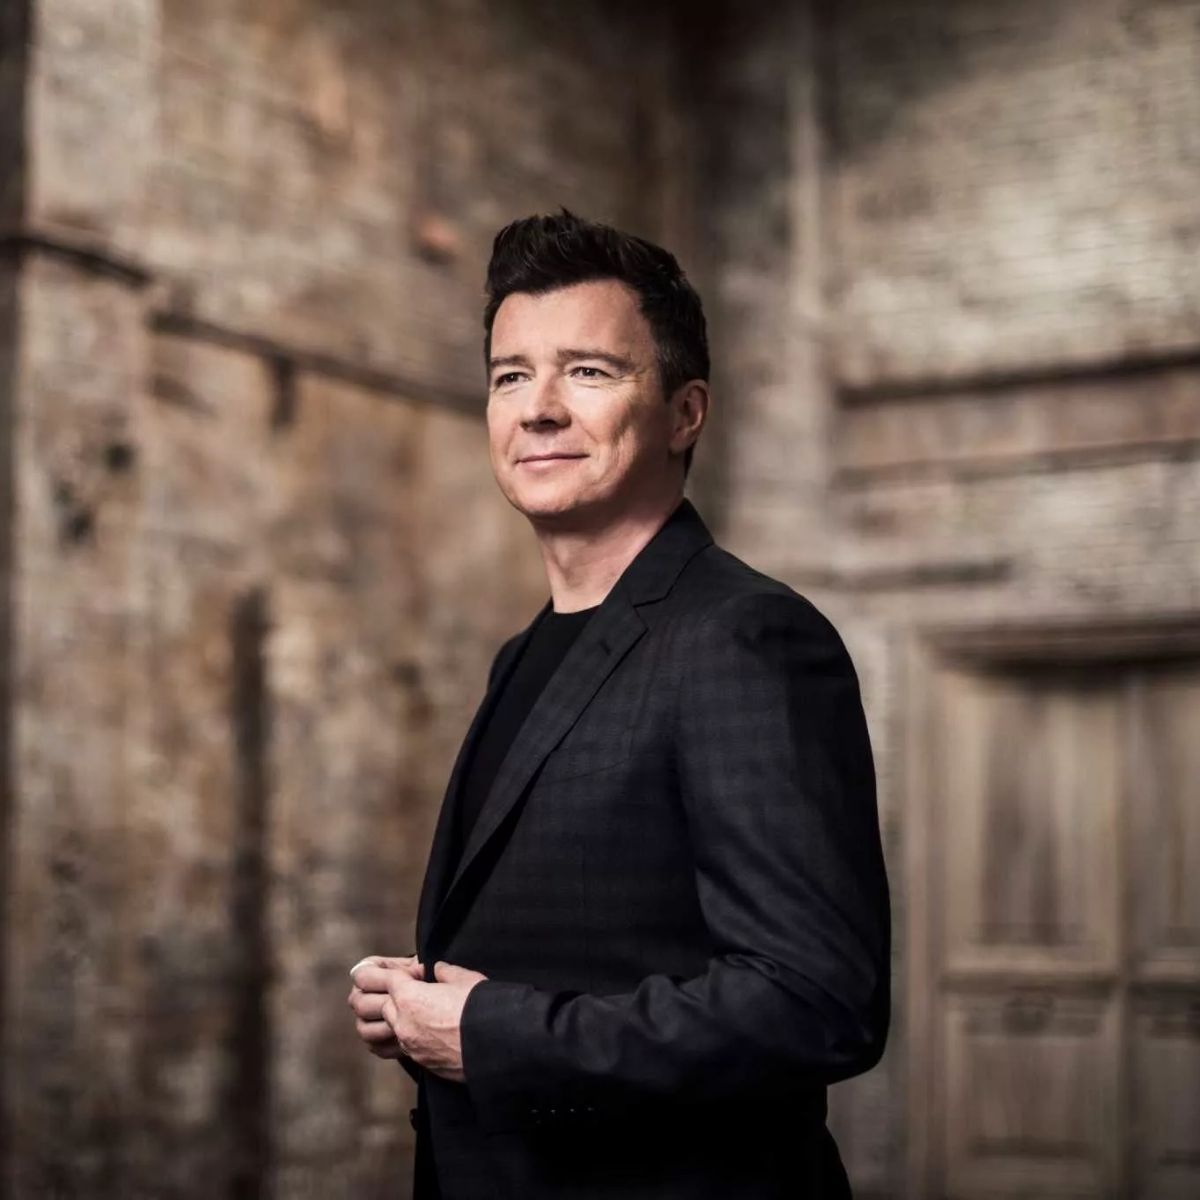 Rick Astley in our time